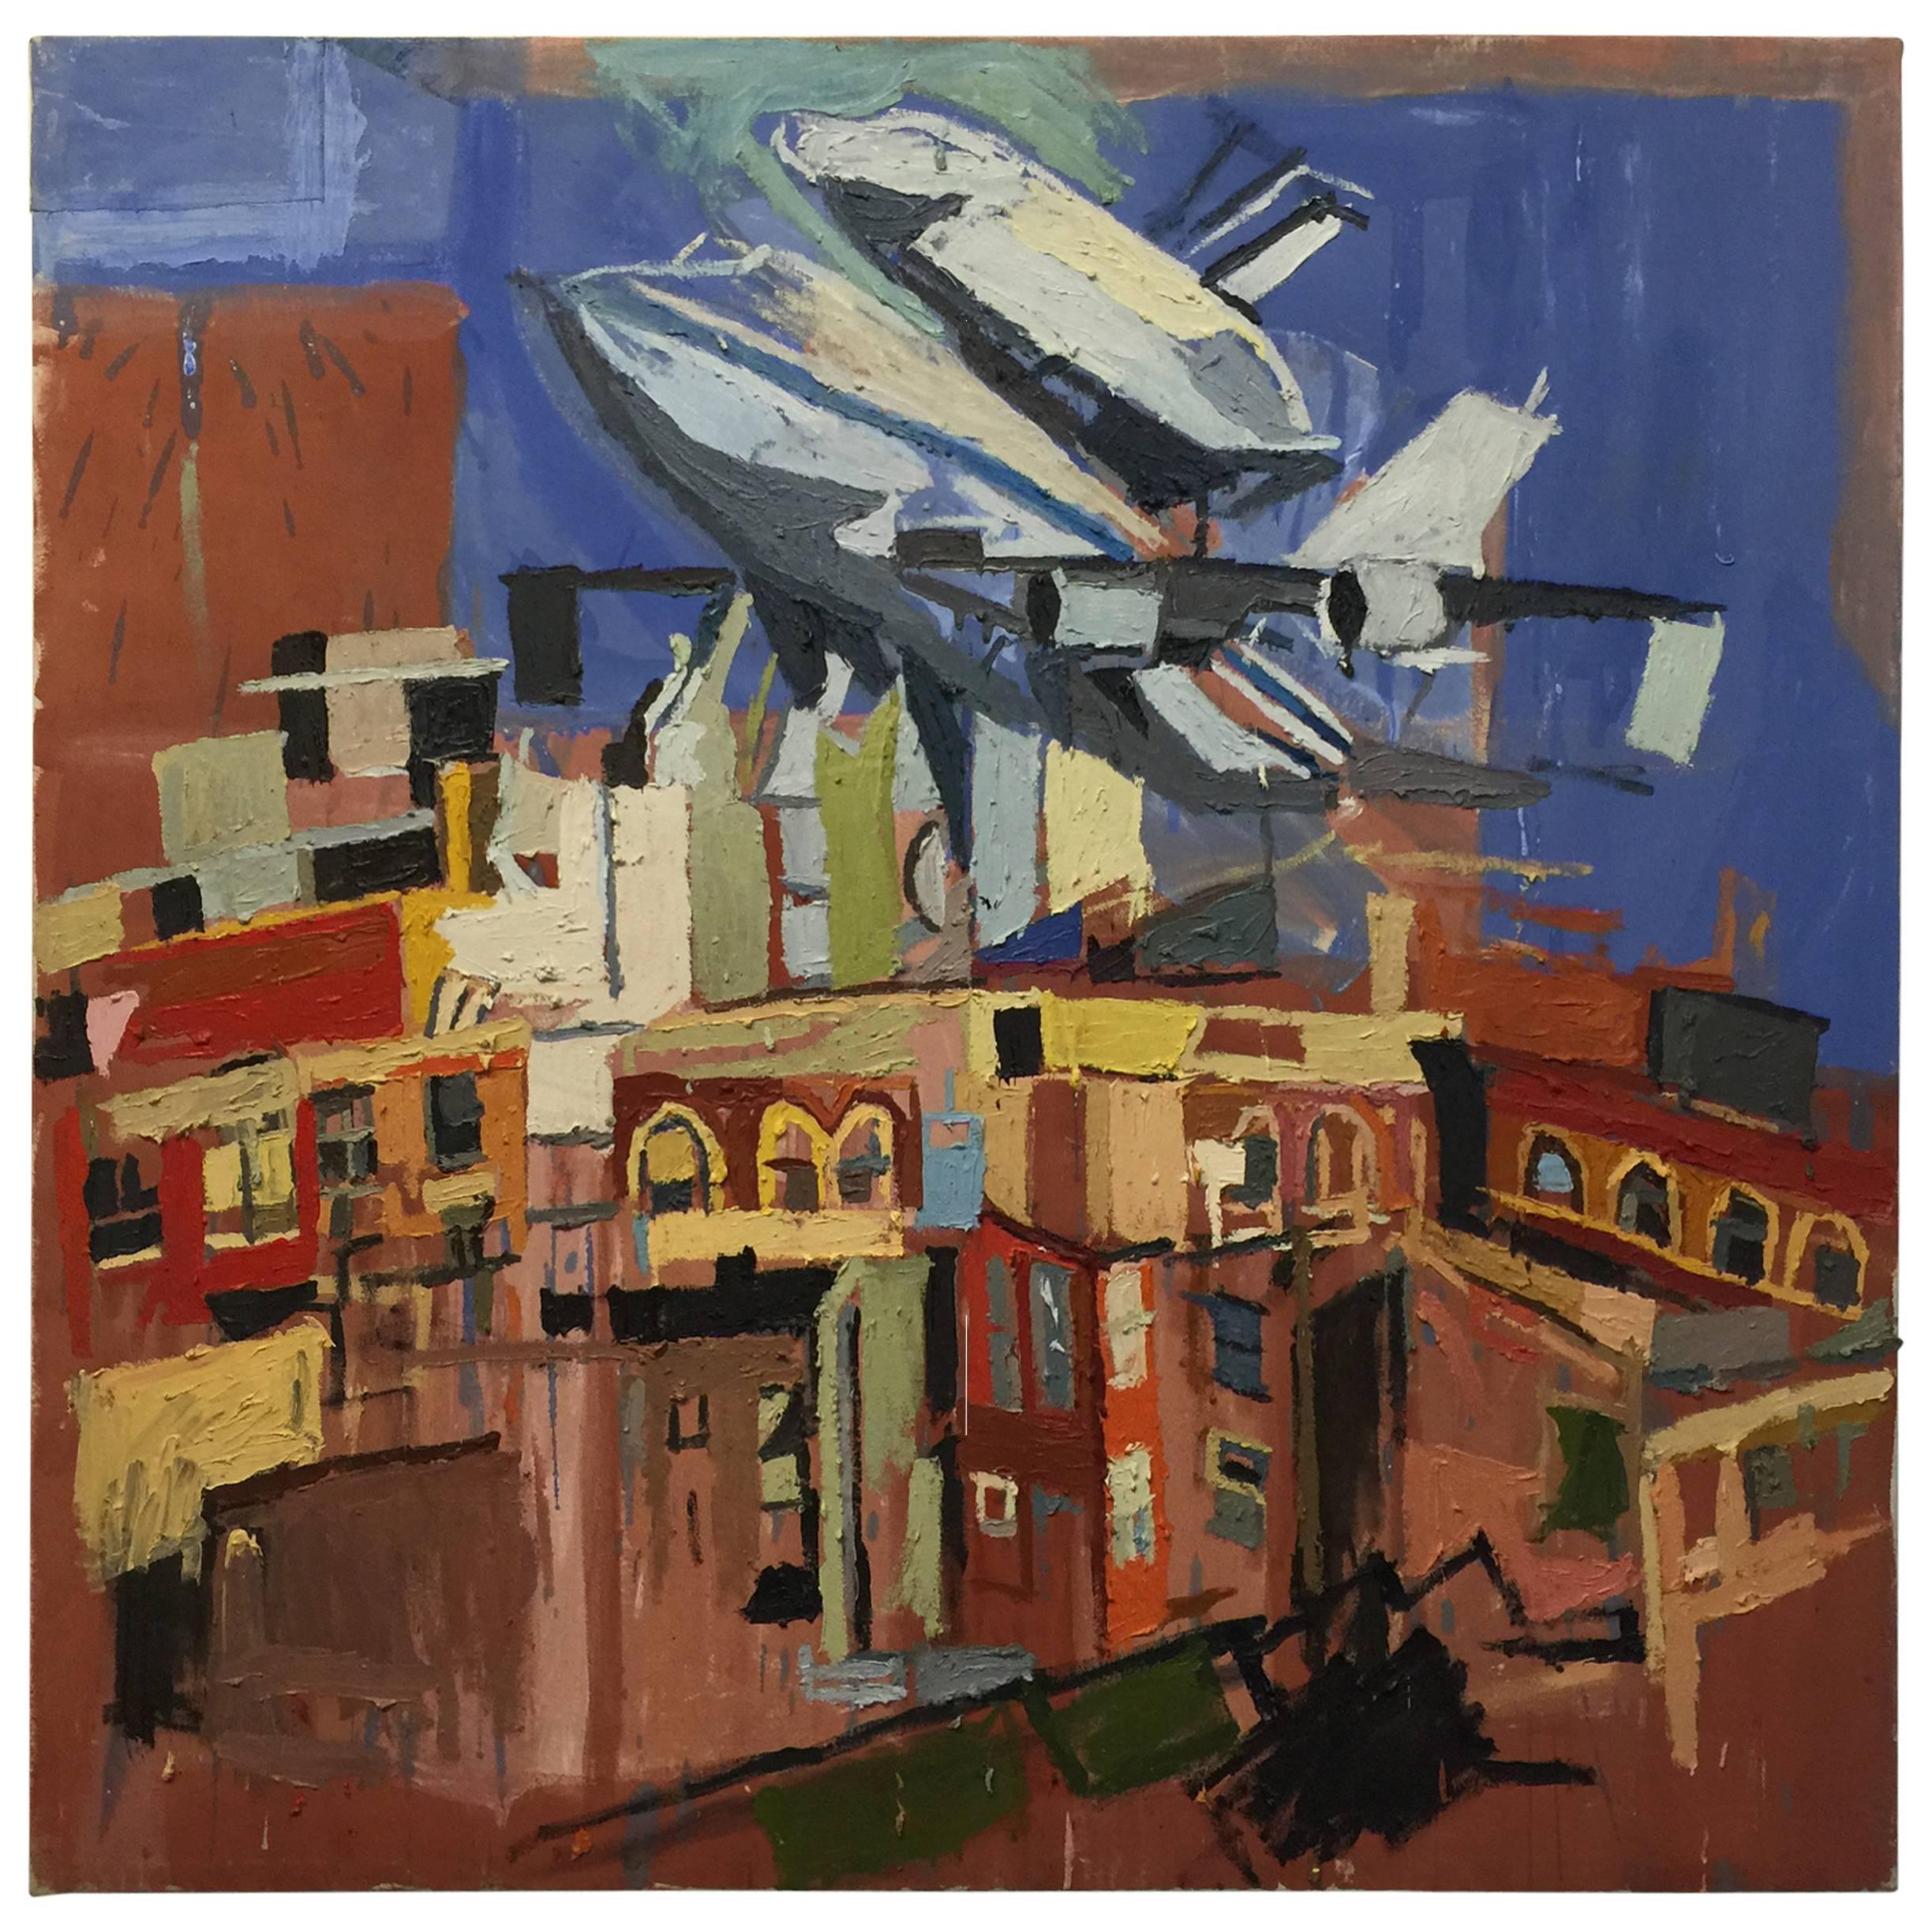 Space Shuttle over Harlem Oil Painting by New York Artist Clintel Steed, 2012 For Sale